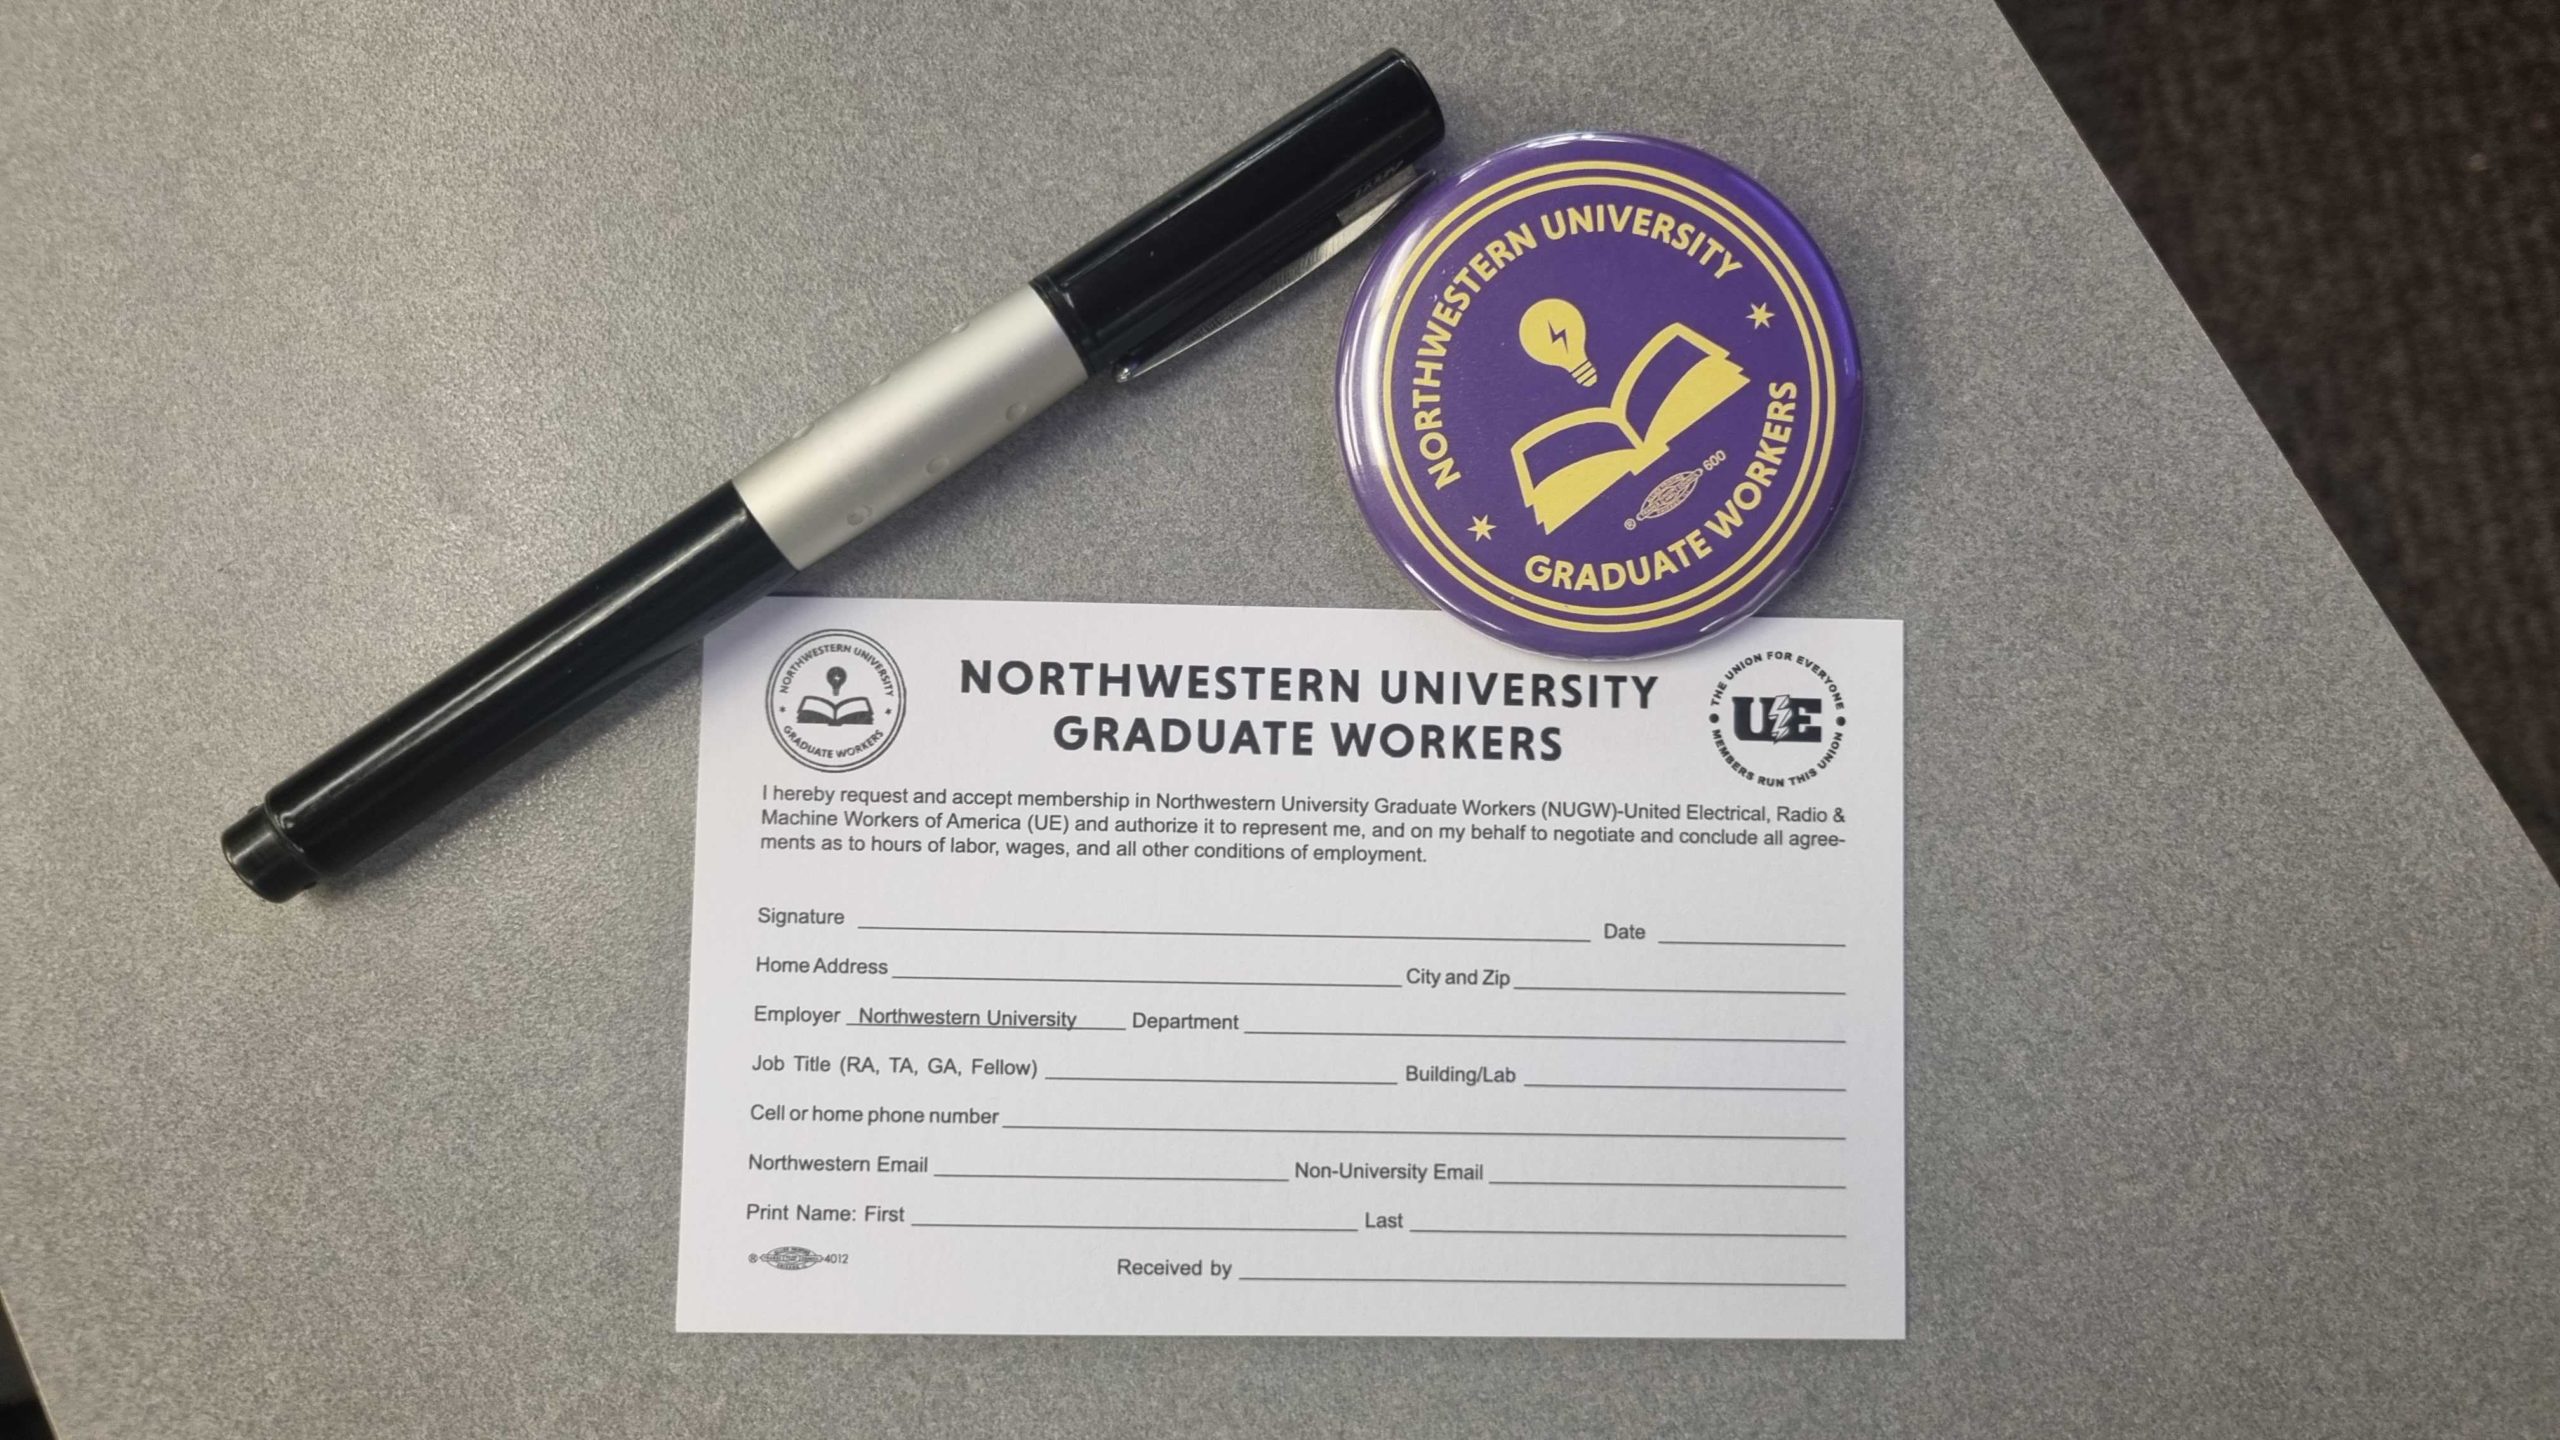 An NUGW union card sits next to a purple NUGW button and a pen, ready to be signed